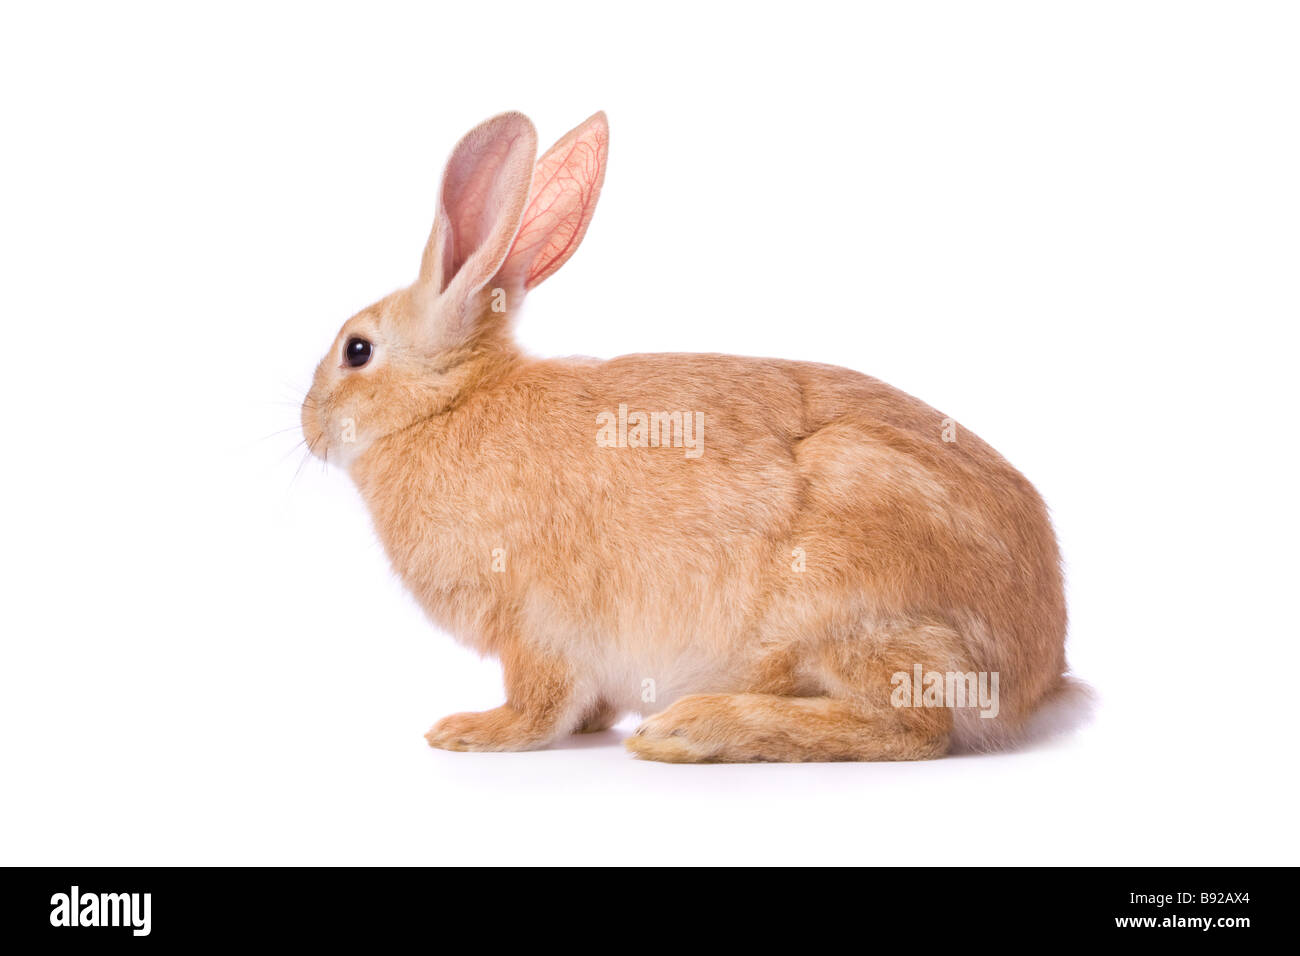 Timid young red rabbit isolated on white background Stock Photo